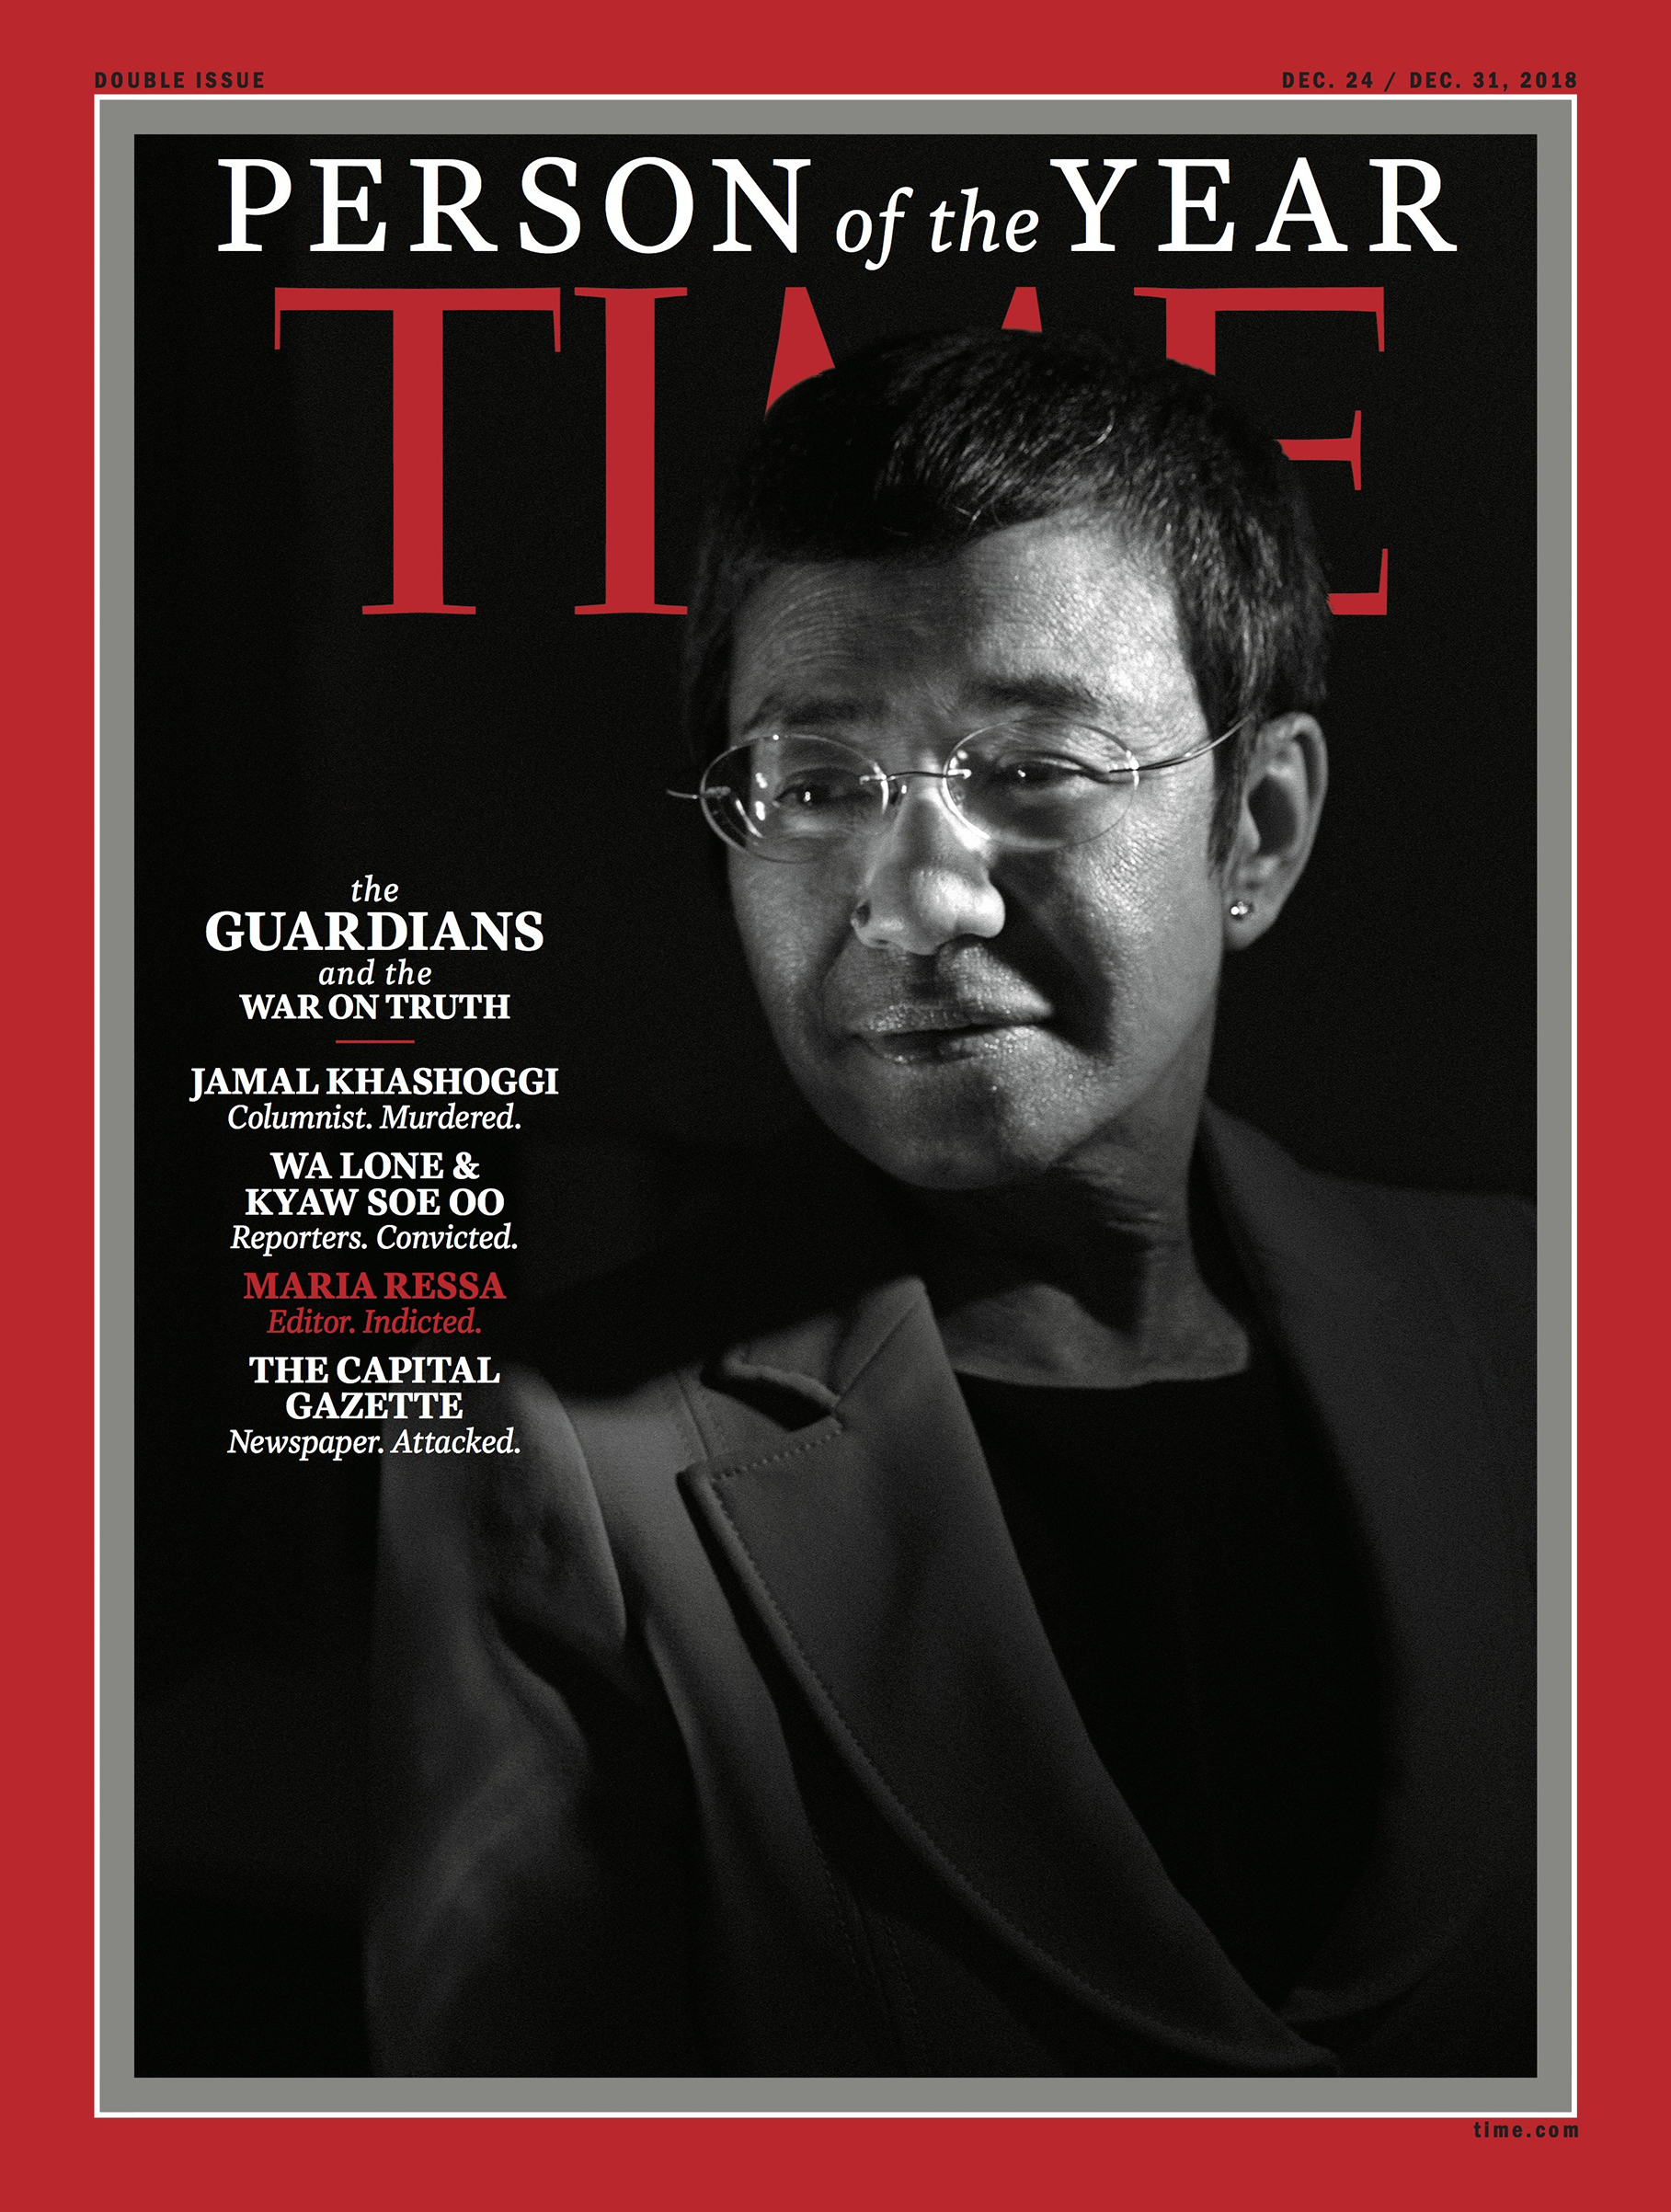 Ressa was among the journalists on TIME’s 2018 Person of the Year covers